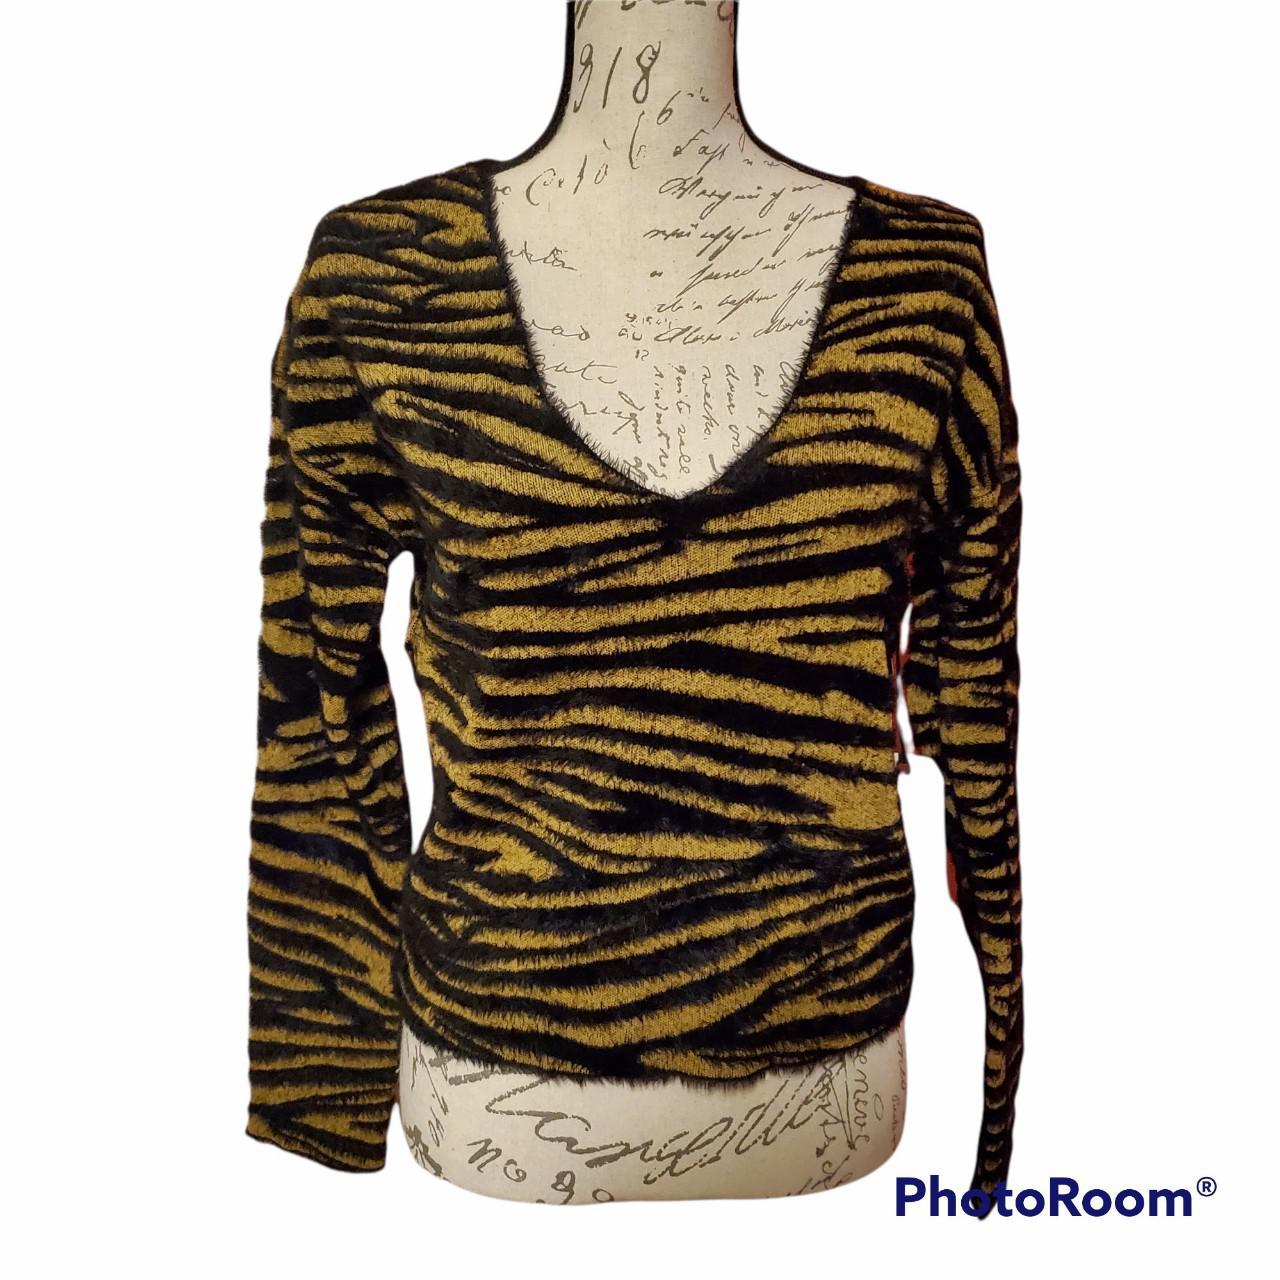 Product Image 1 - Simply gorgeous tiger stripe sweater